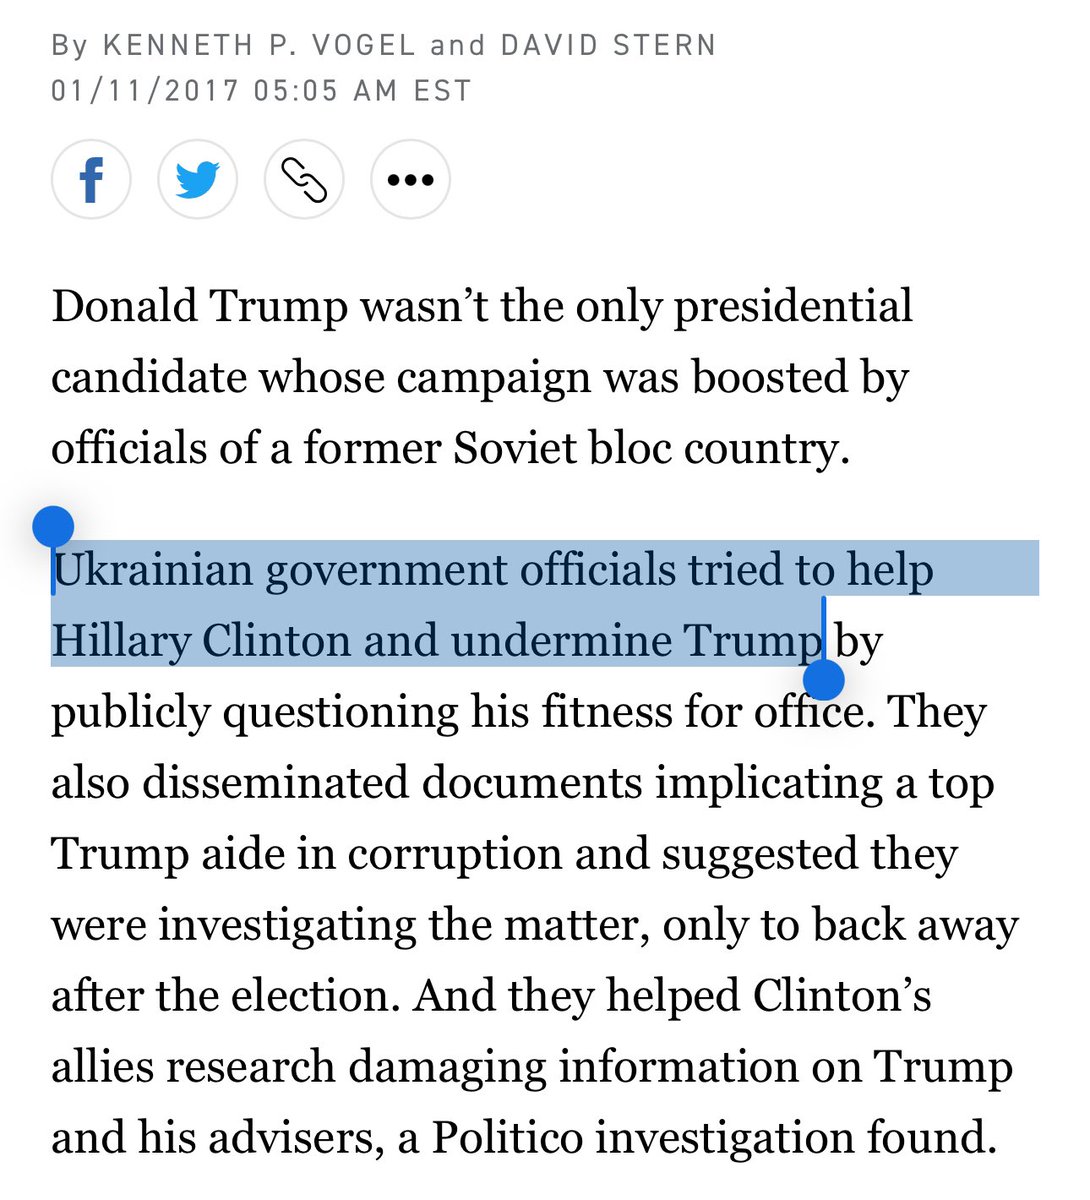 Washington Post today: Trump has “falsely blamed Ukraine for trying to help Democratic rival Hillary Clinton.” Politico in 2017: “Ukrainian government officials tried to help Hillary Clinton and undermine Trump by publicly questioning his fitness for office.”